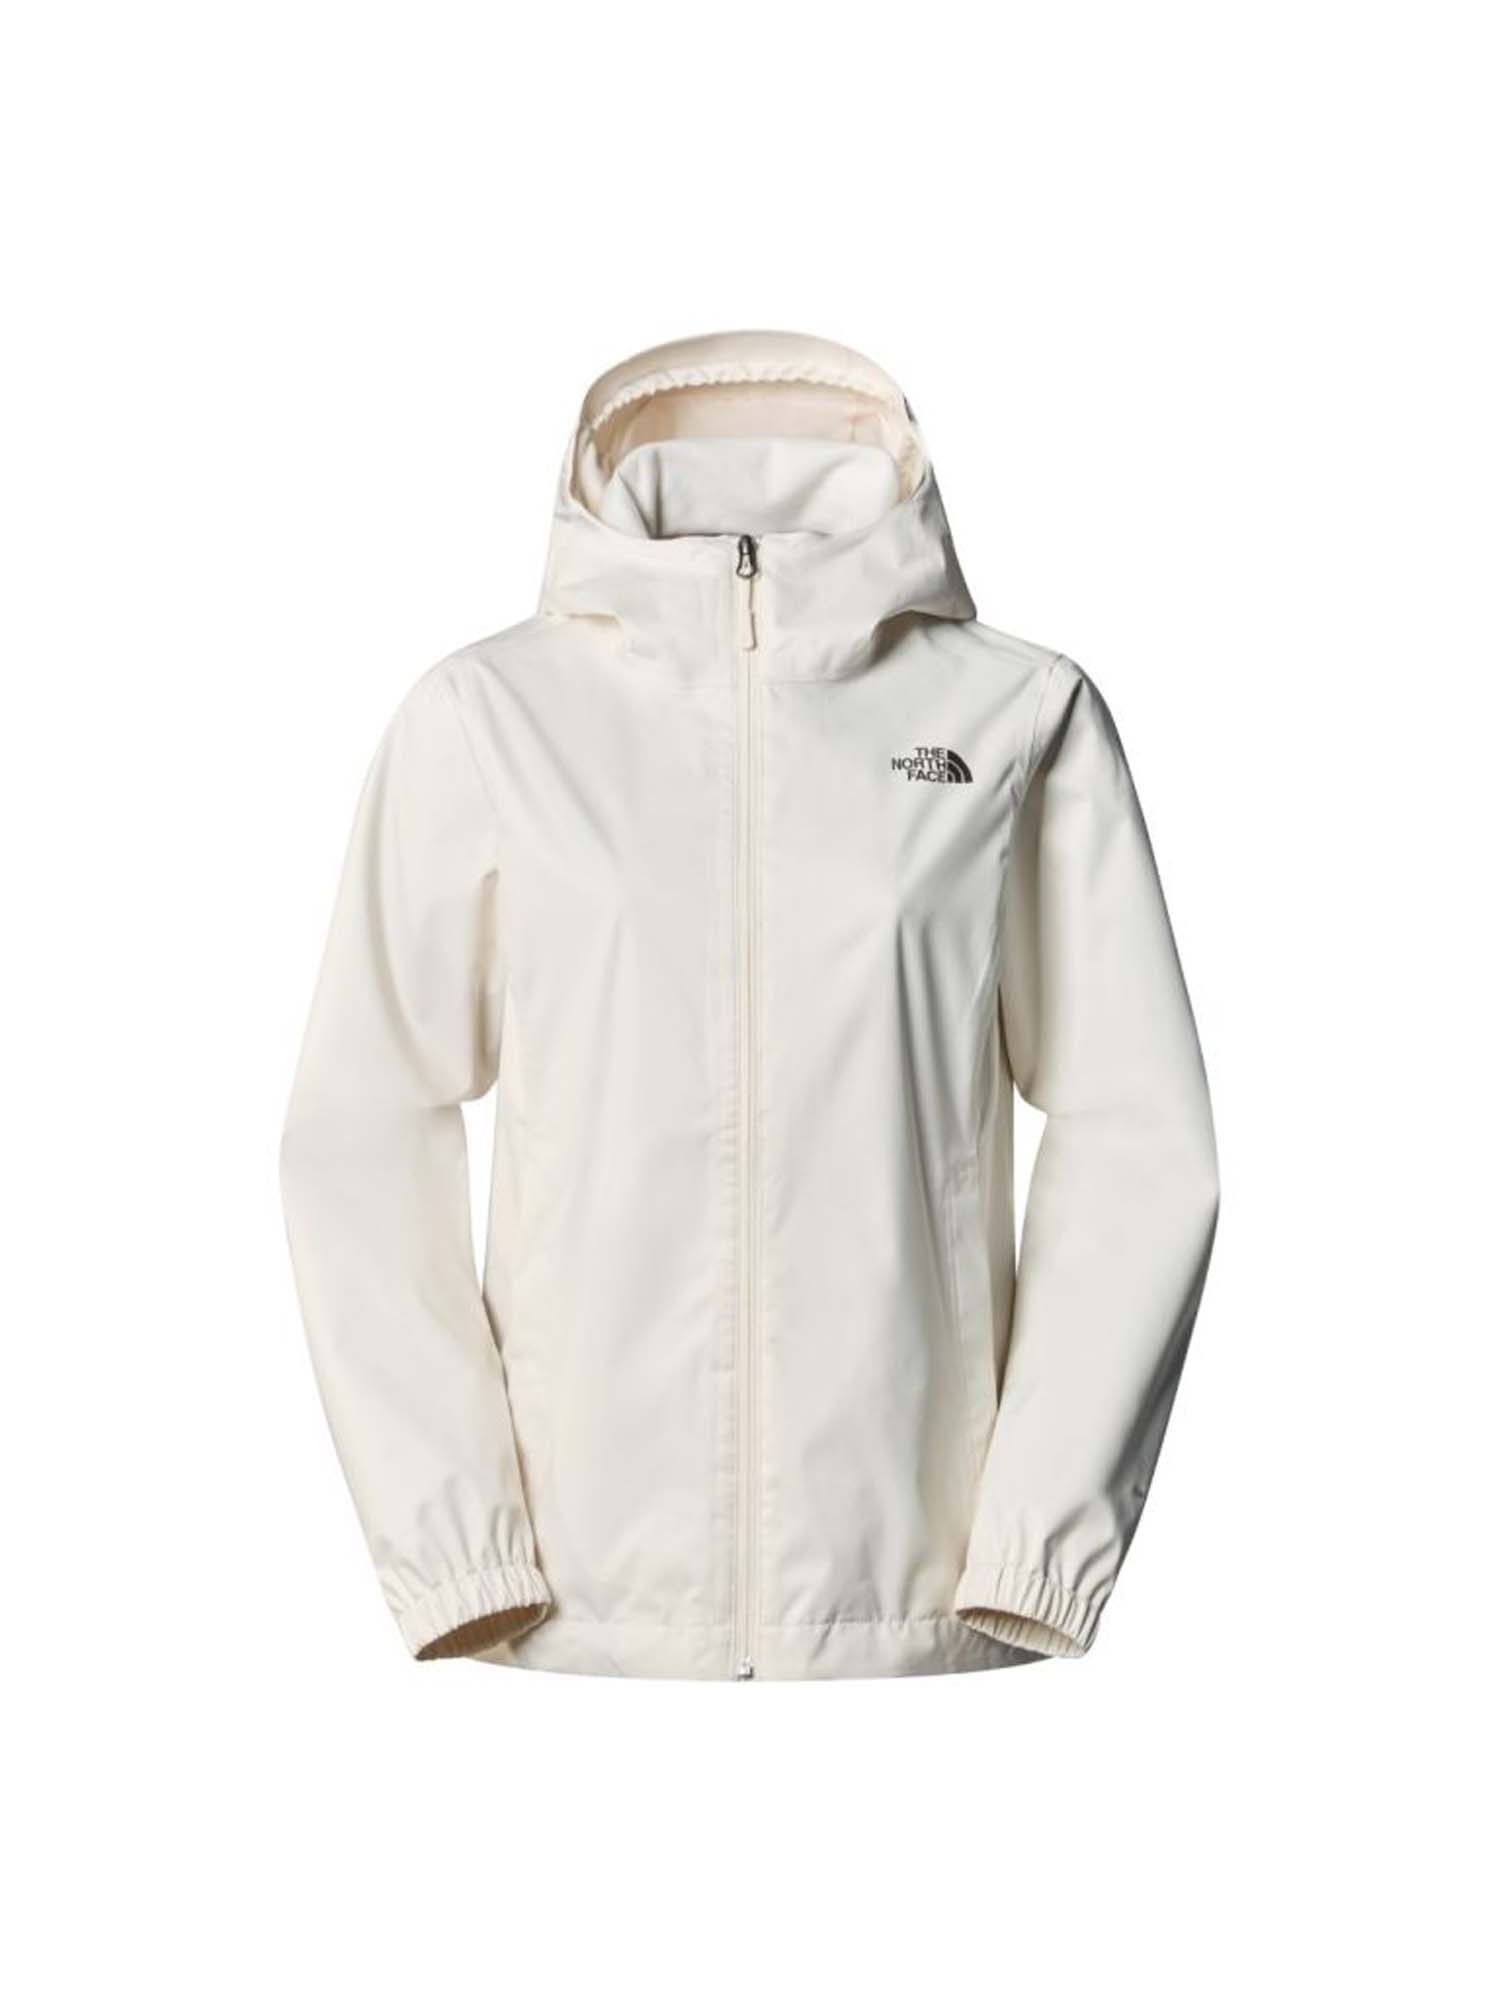 THE NORTH FACE W Quest jacket